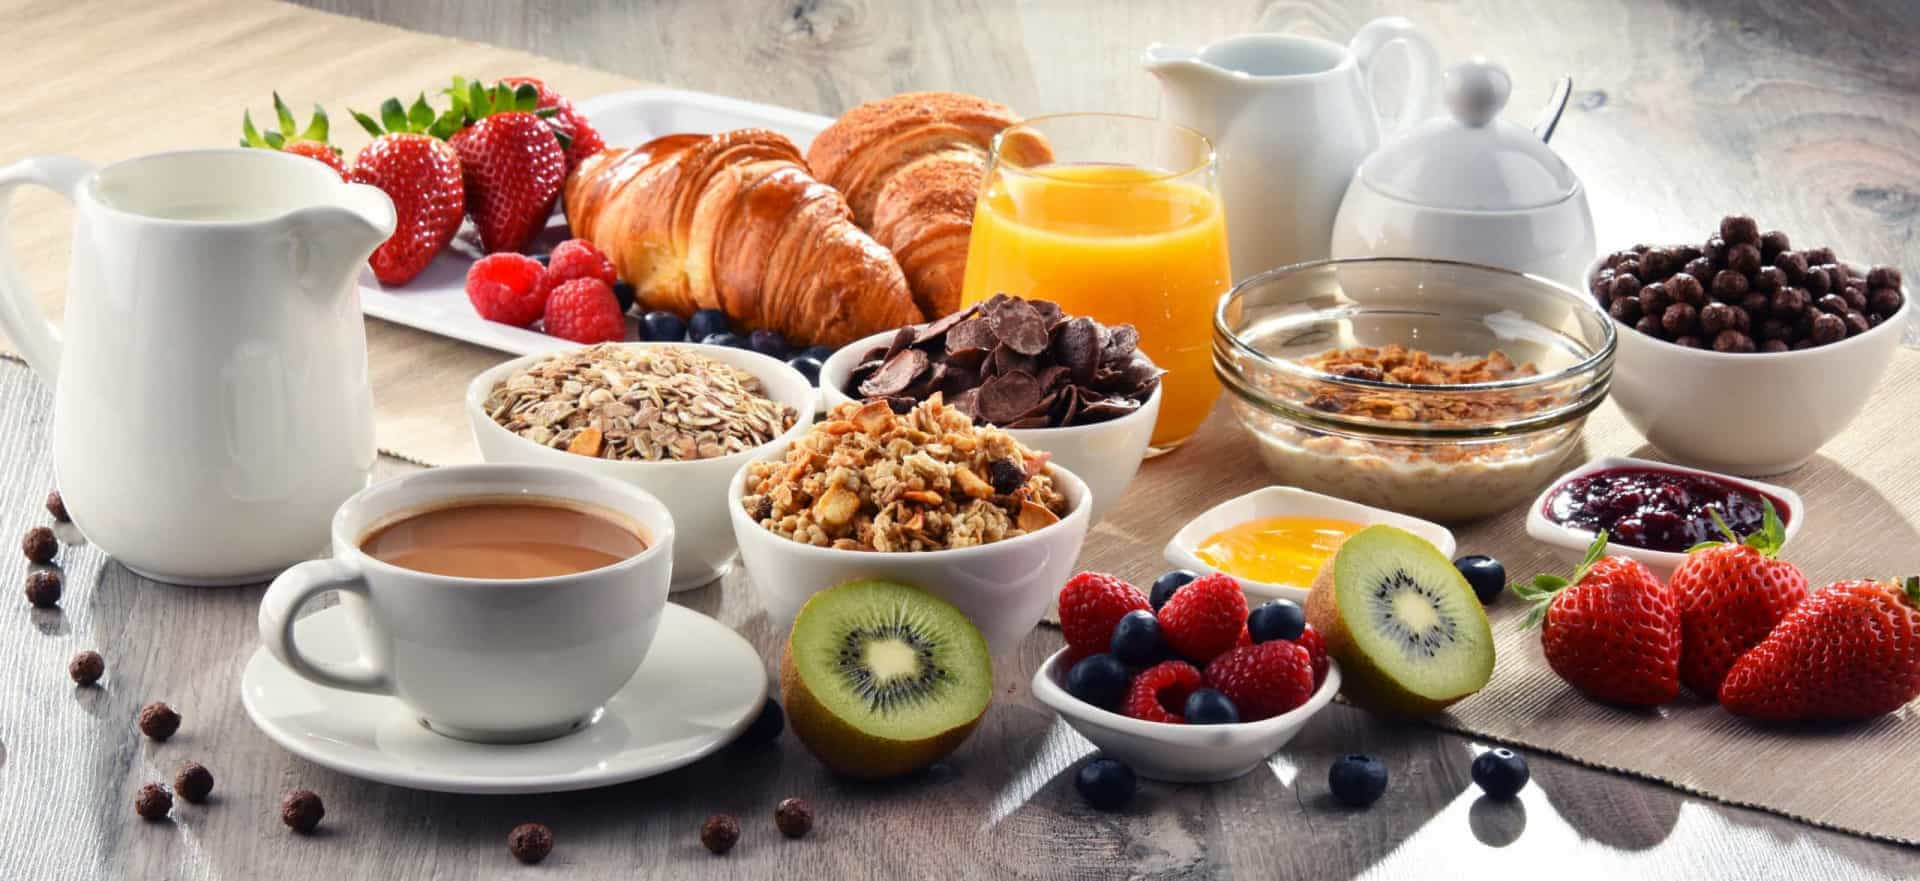 Breakfast: Still the most important meal of the day?